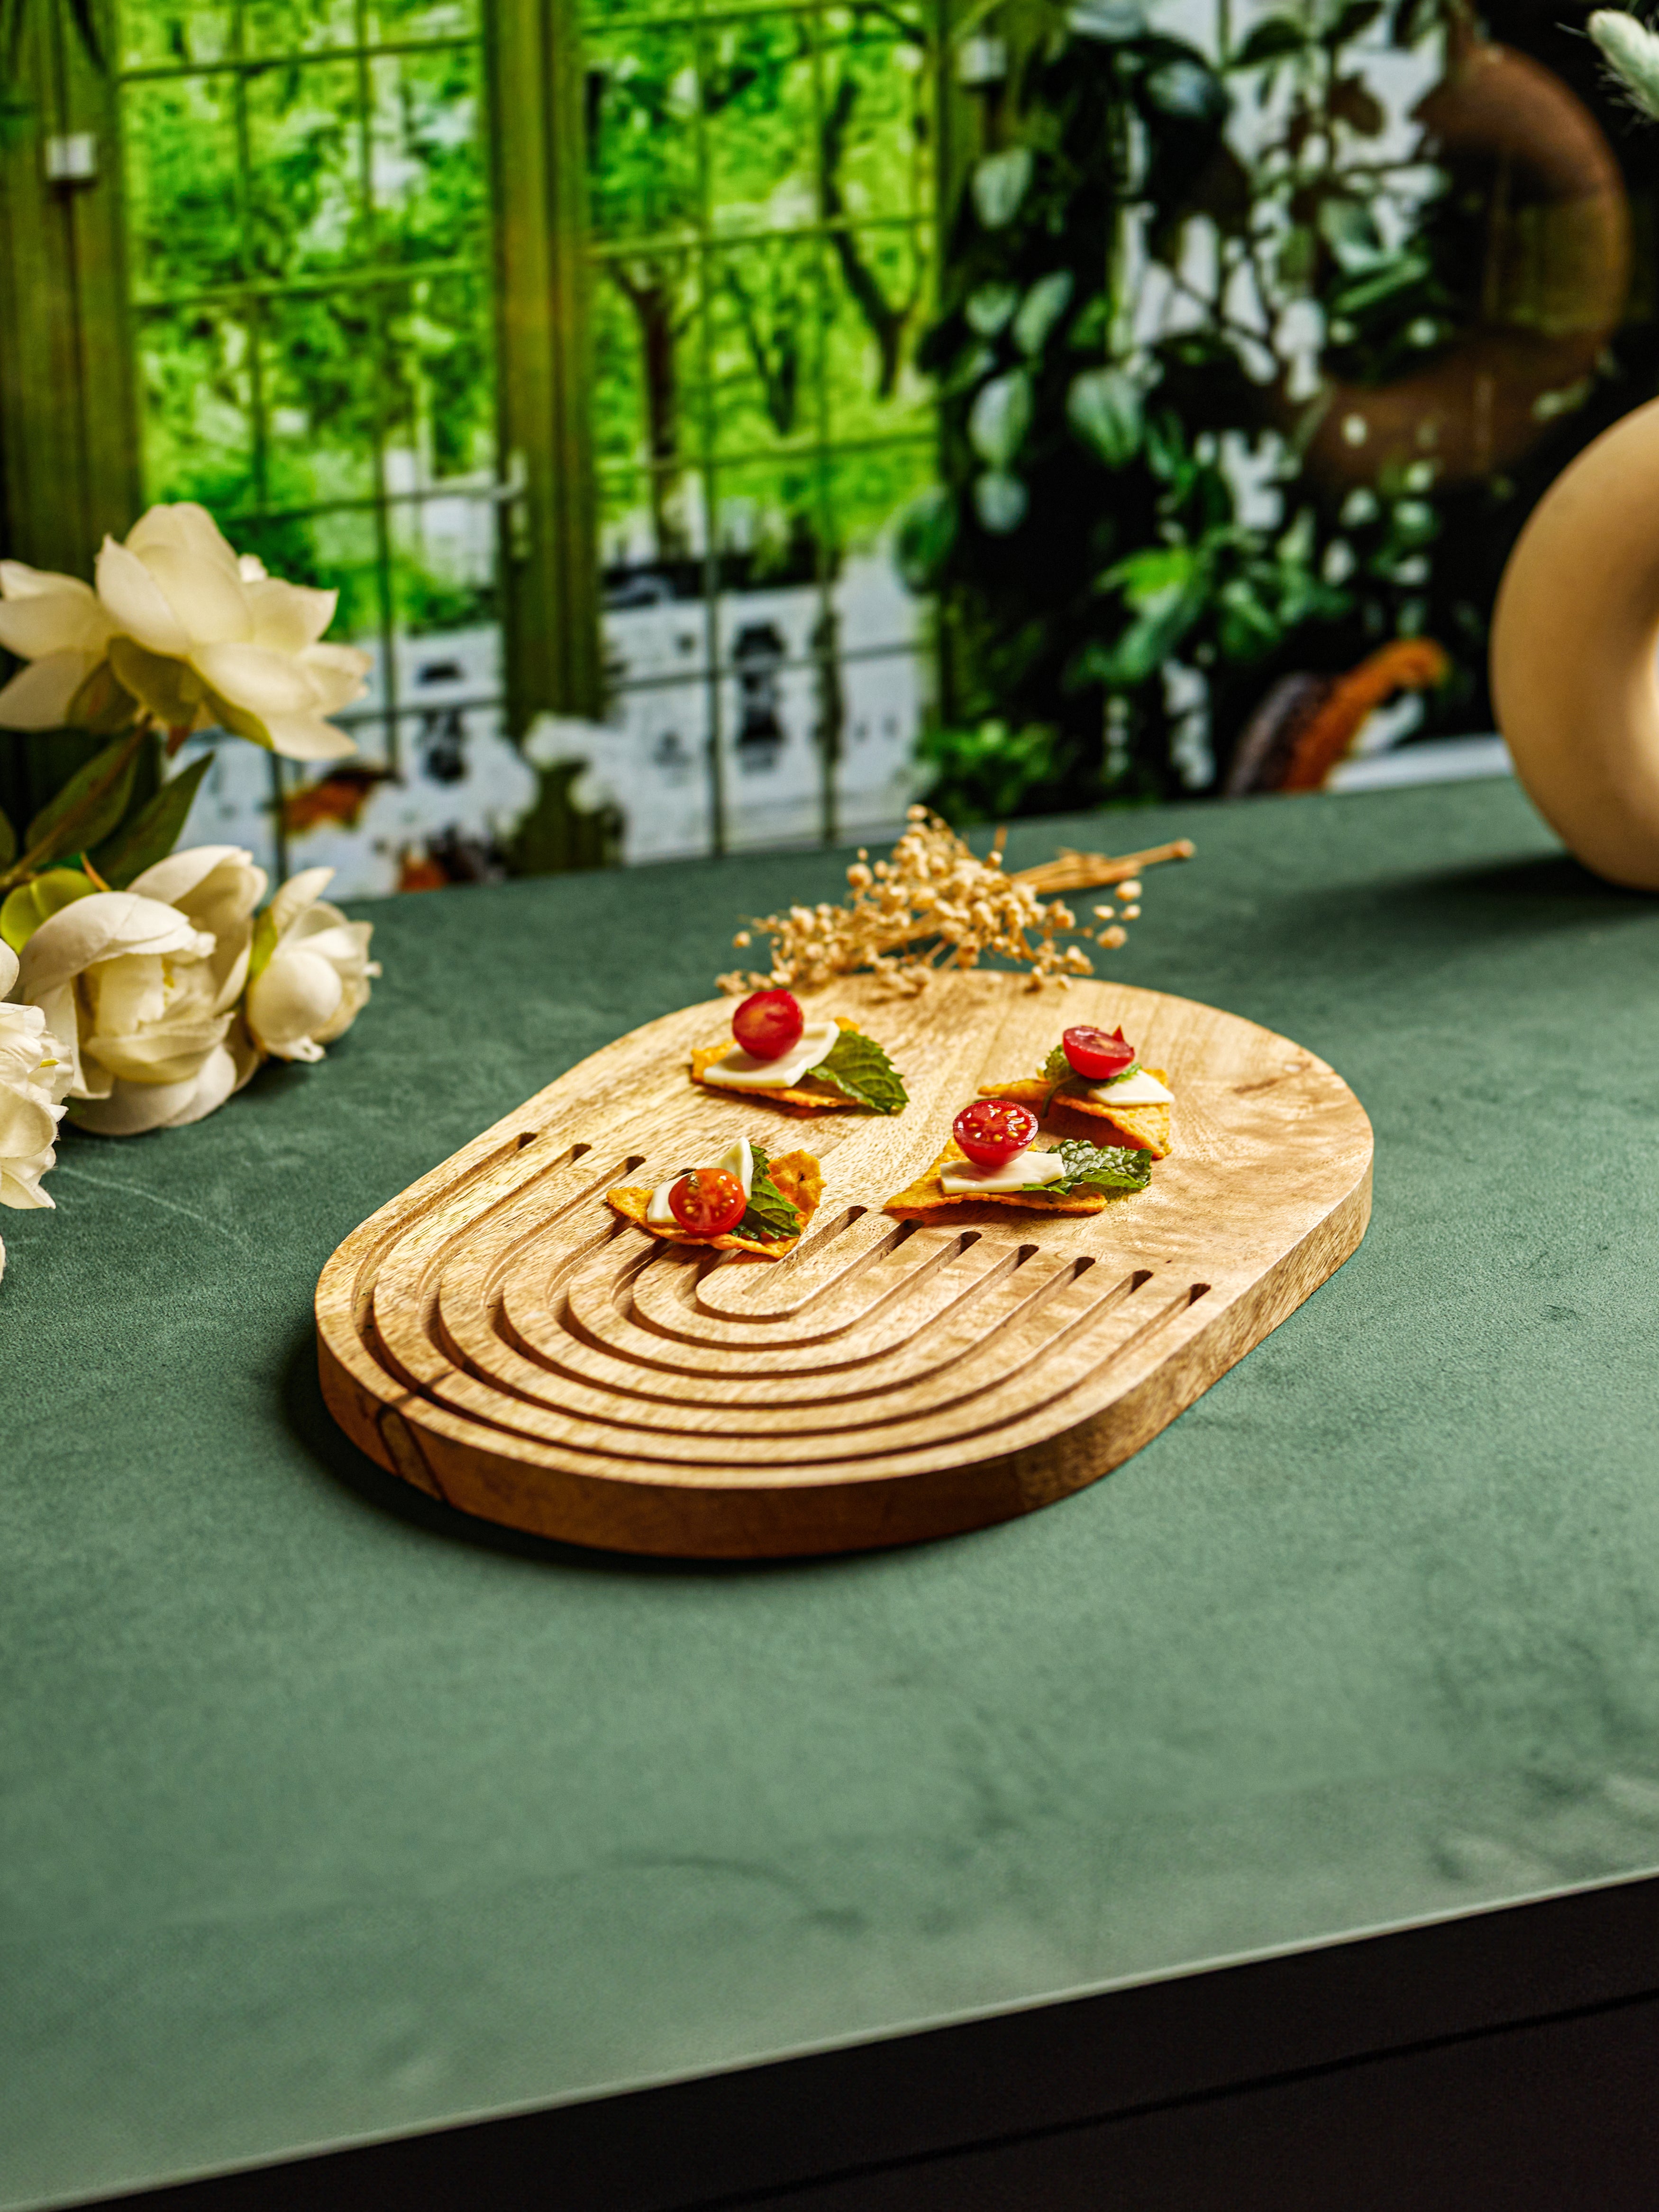 HANDCRAFTED WOODEN OVAL PLATTER